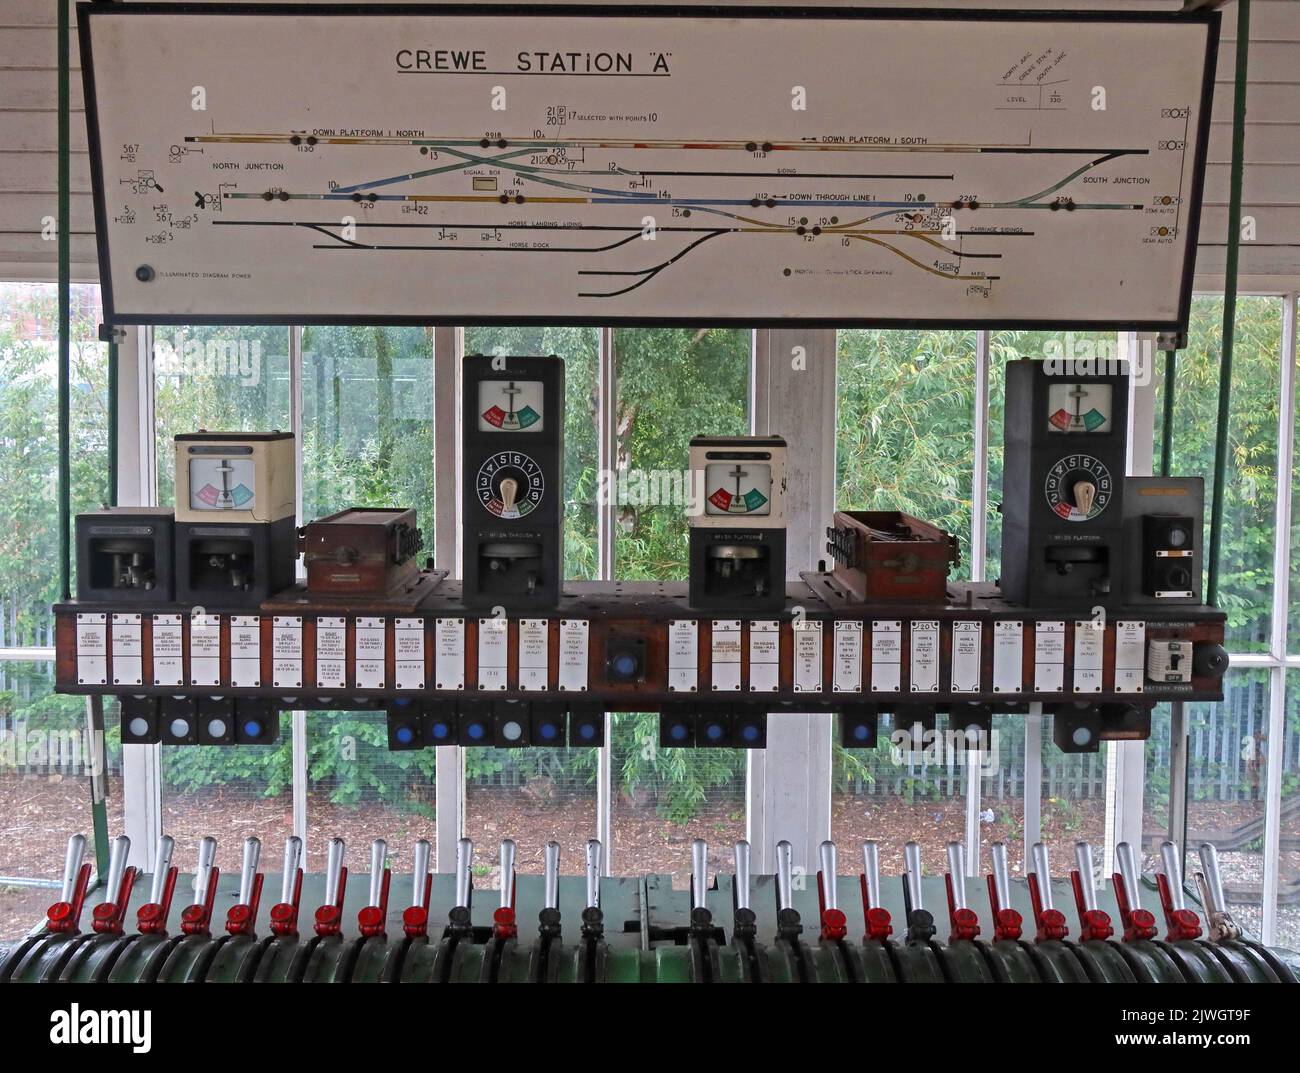 Traditional Victorian railway signalbox dashboard and schematic, Crewe Station A, at Cheshire, England, UK, CW1 2DB Stock Photo